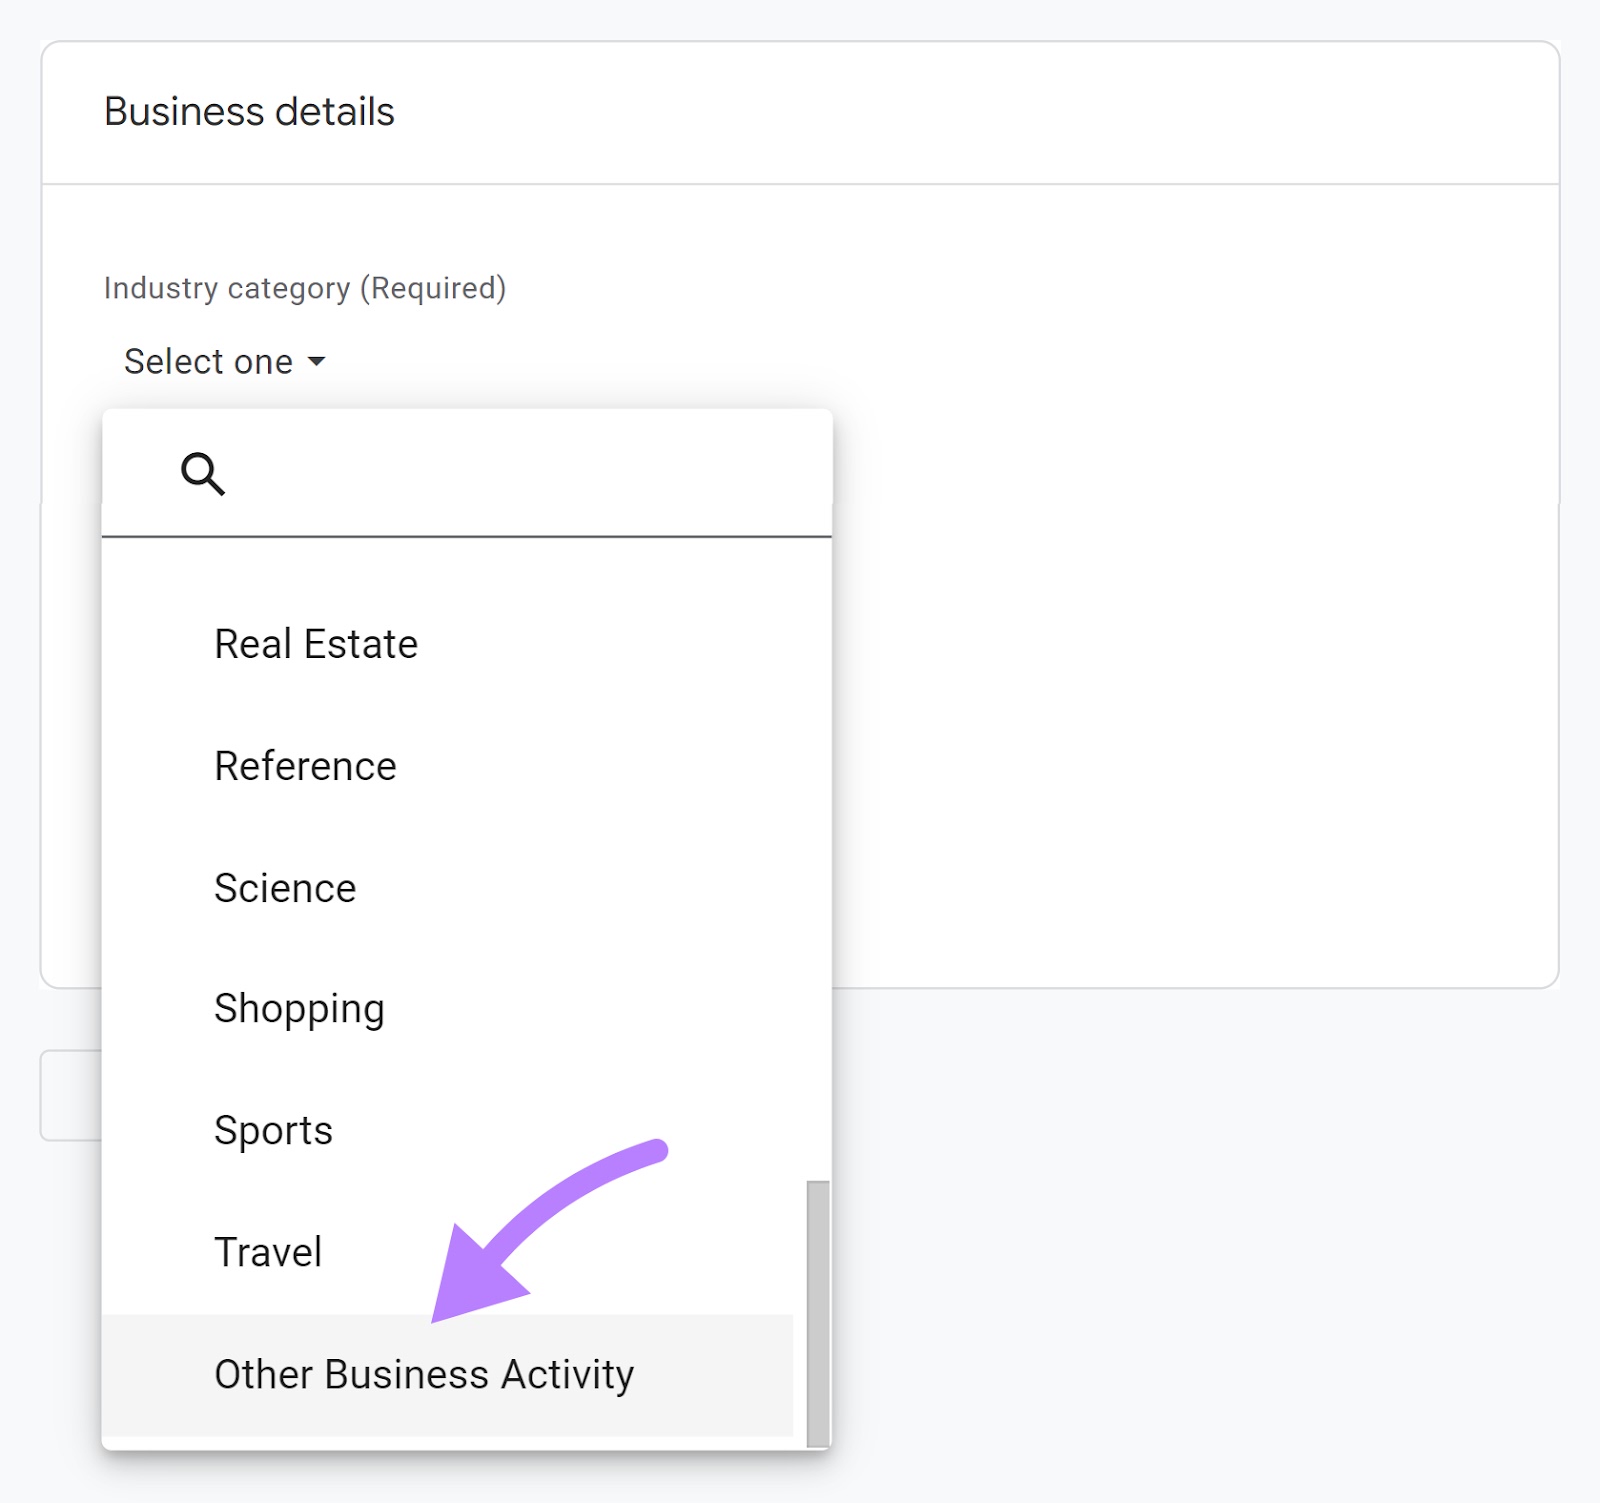 "Other Business Activity" selected under "Industry category" drop-down menu